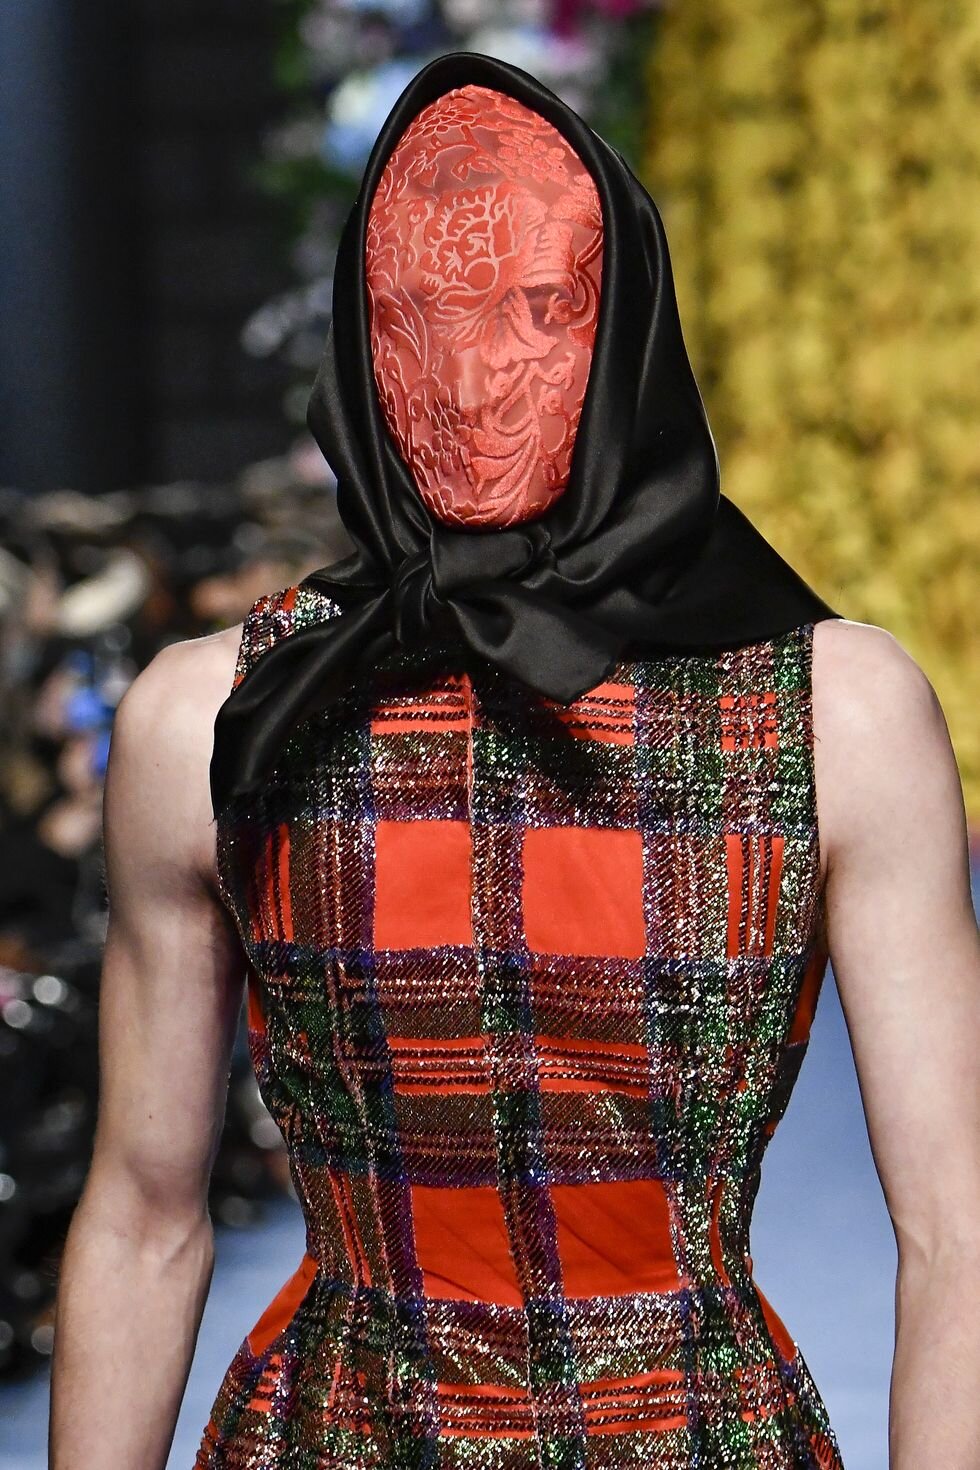 Has the last few years of “mask fashion” prepared us for a new normal ...